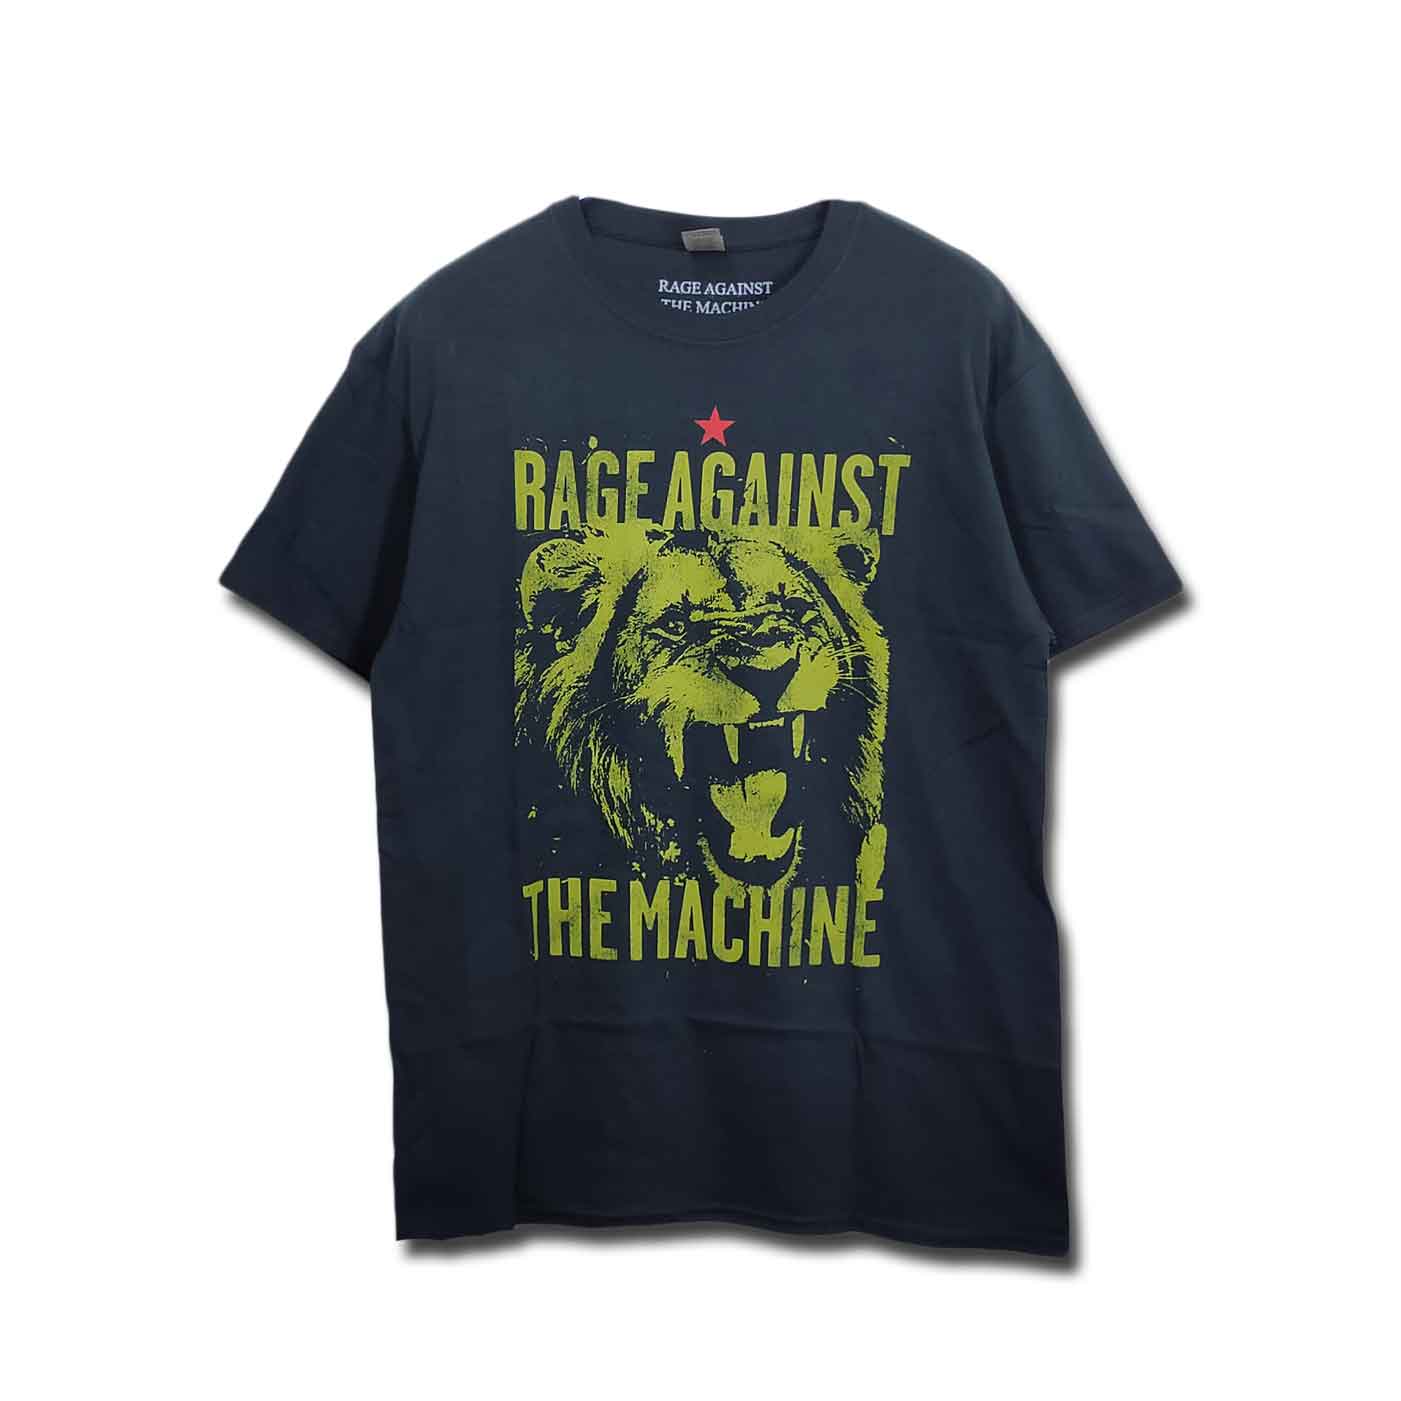 rage against the machine Tシャツ レイジ